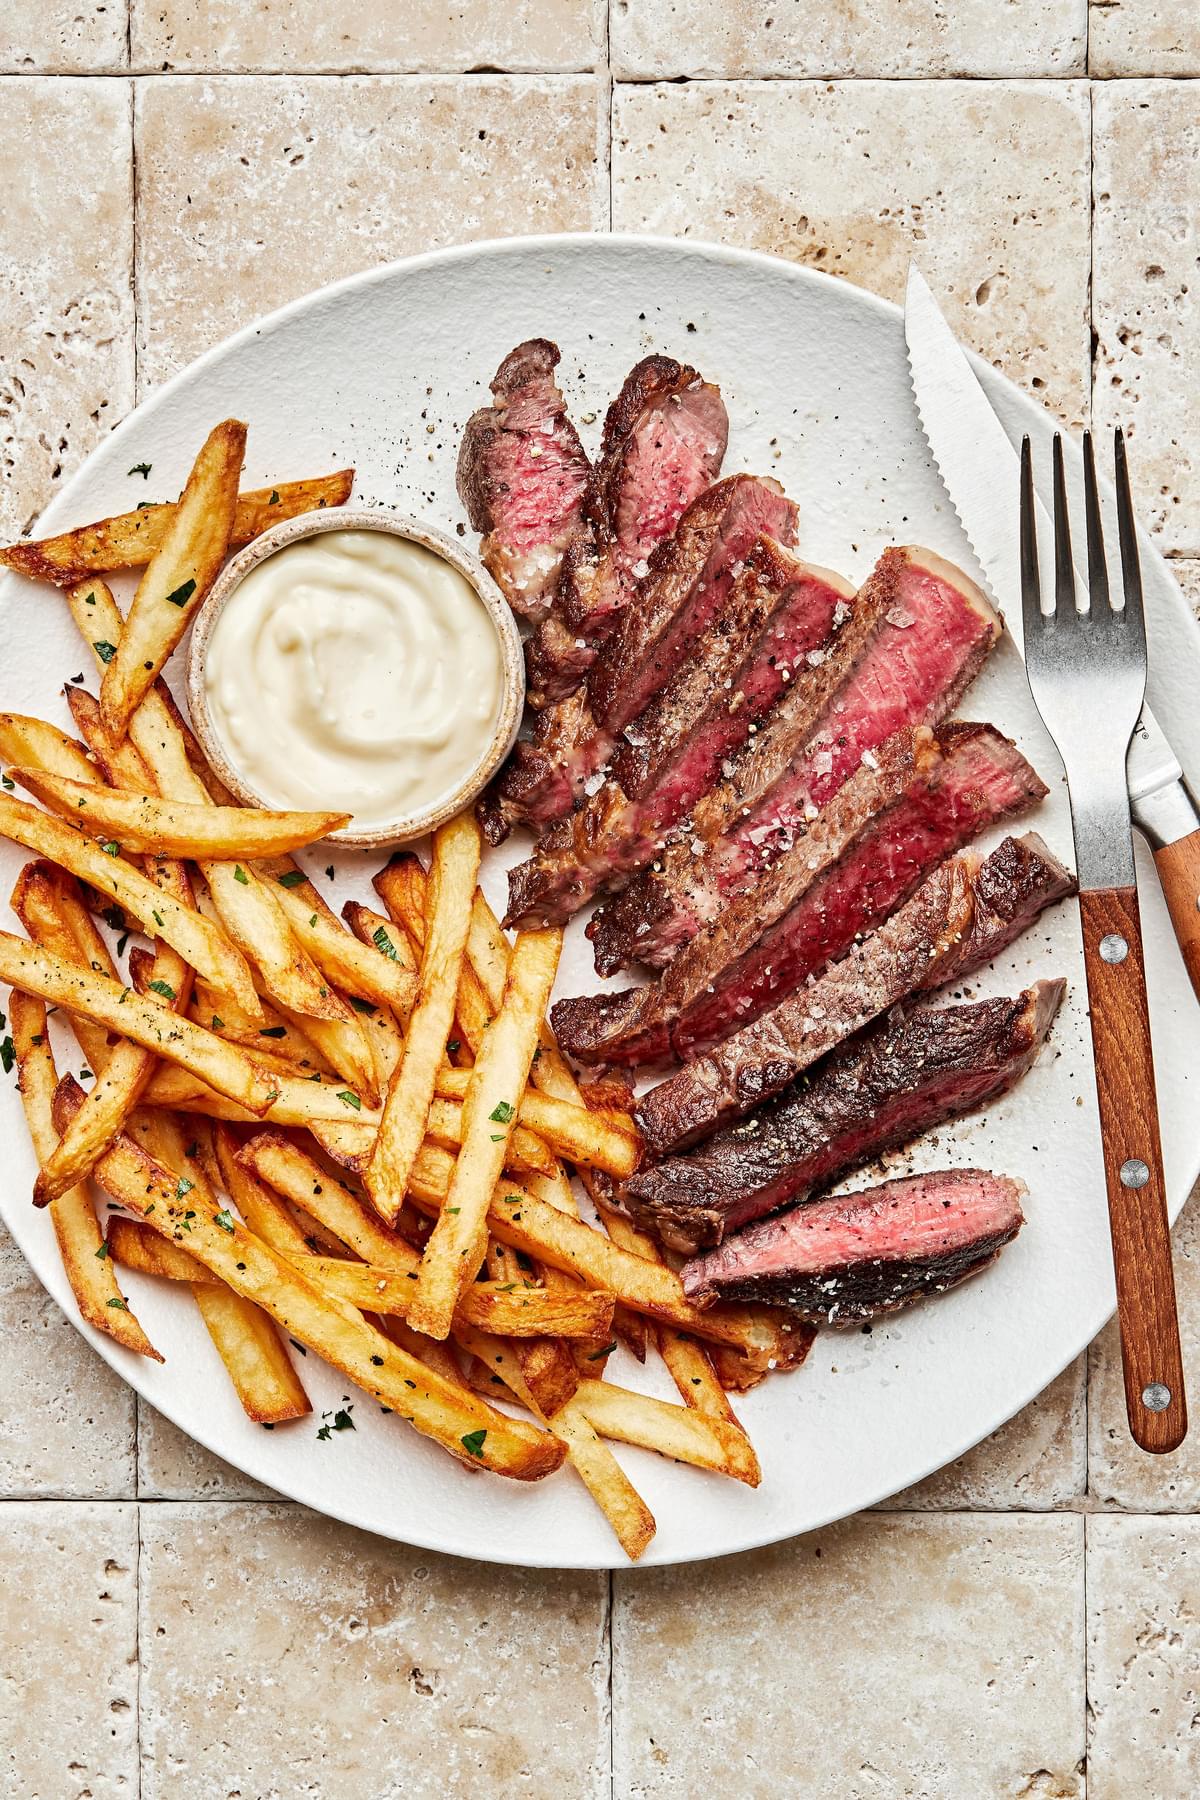 Homemade Steak Frites on plate with a fork and knife served with garlic aioli